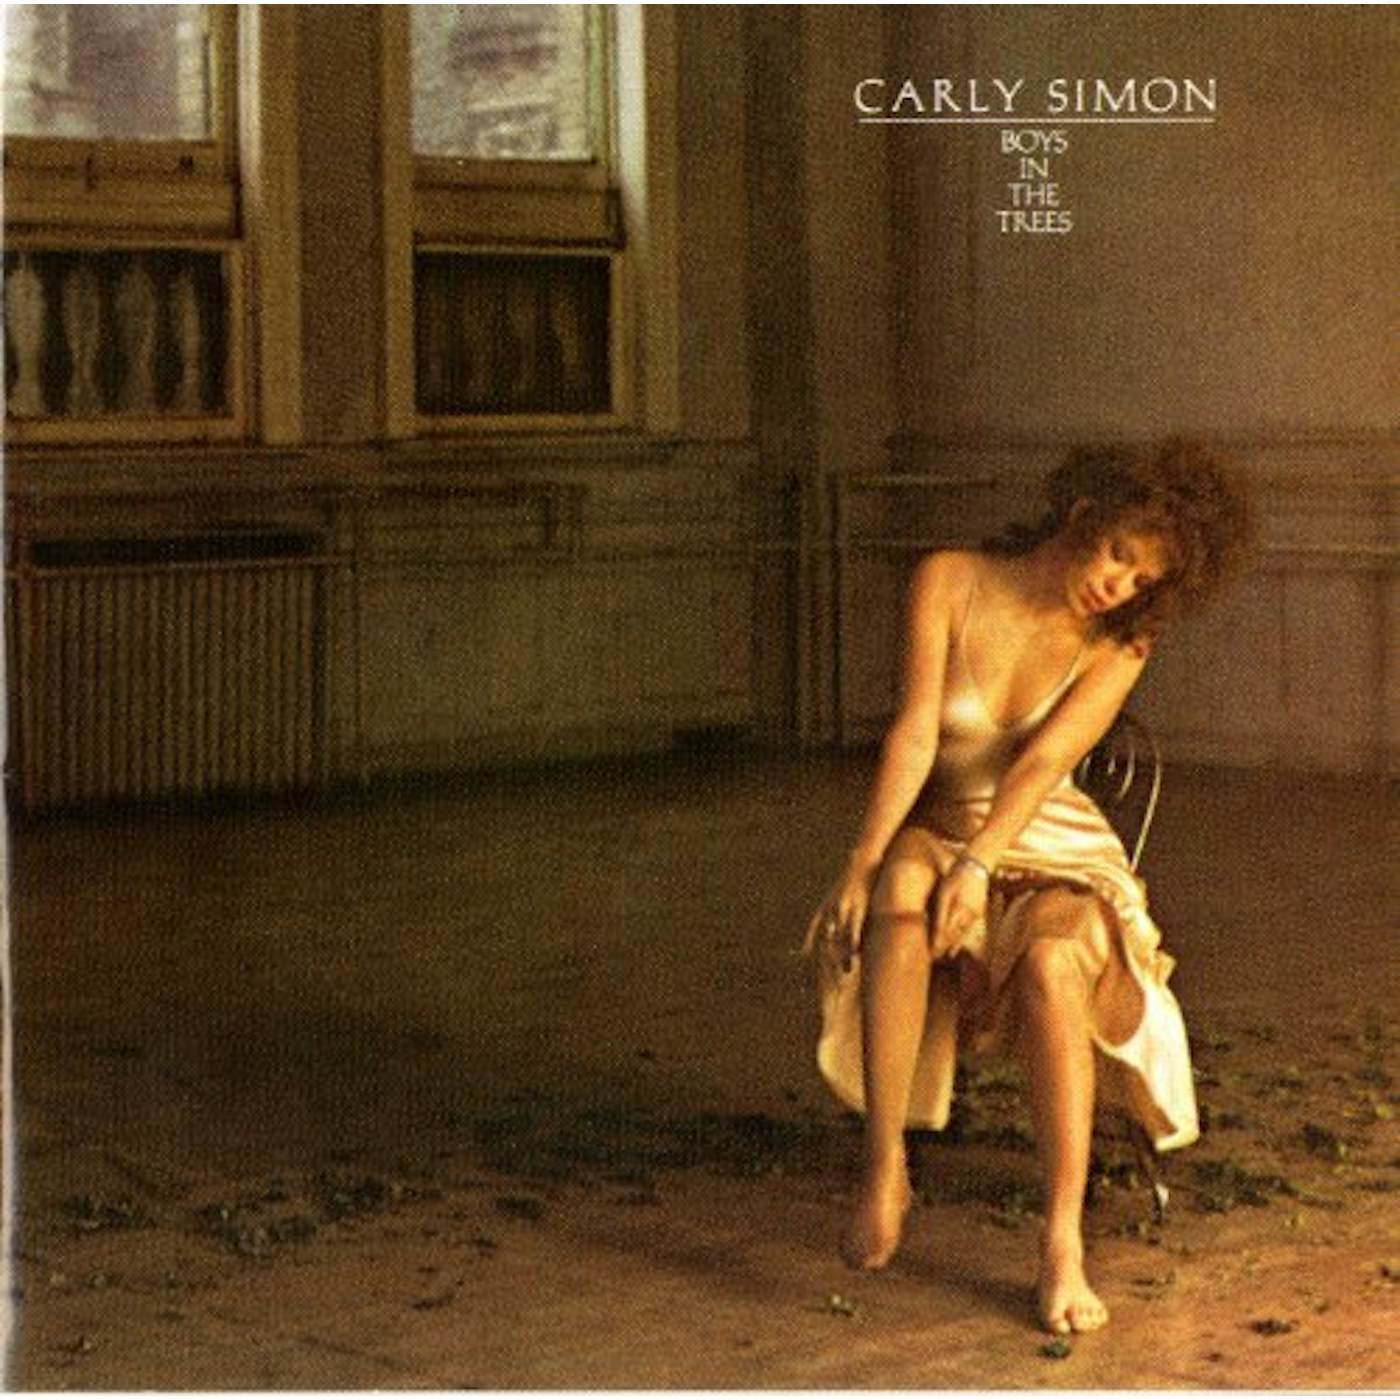 Carly Simon BOYS IN THE TREES (YOU BELONG TO ME) Vinyl Record